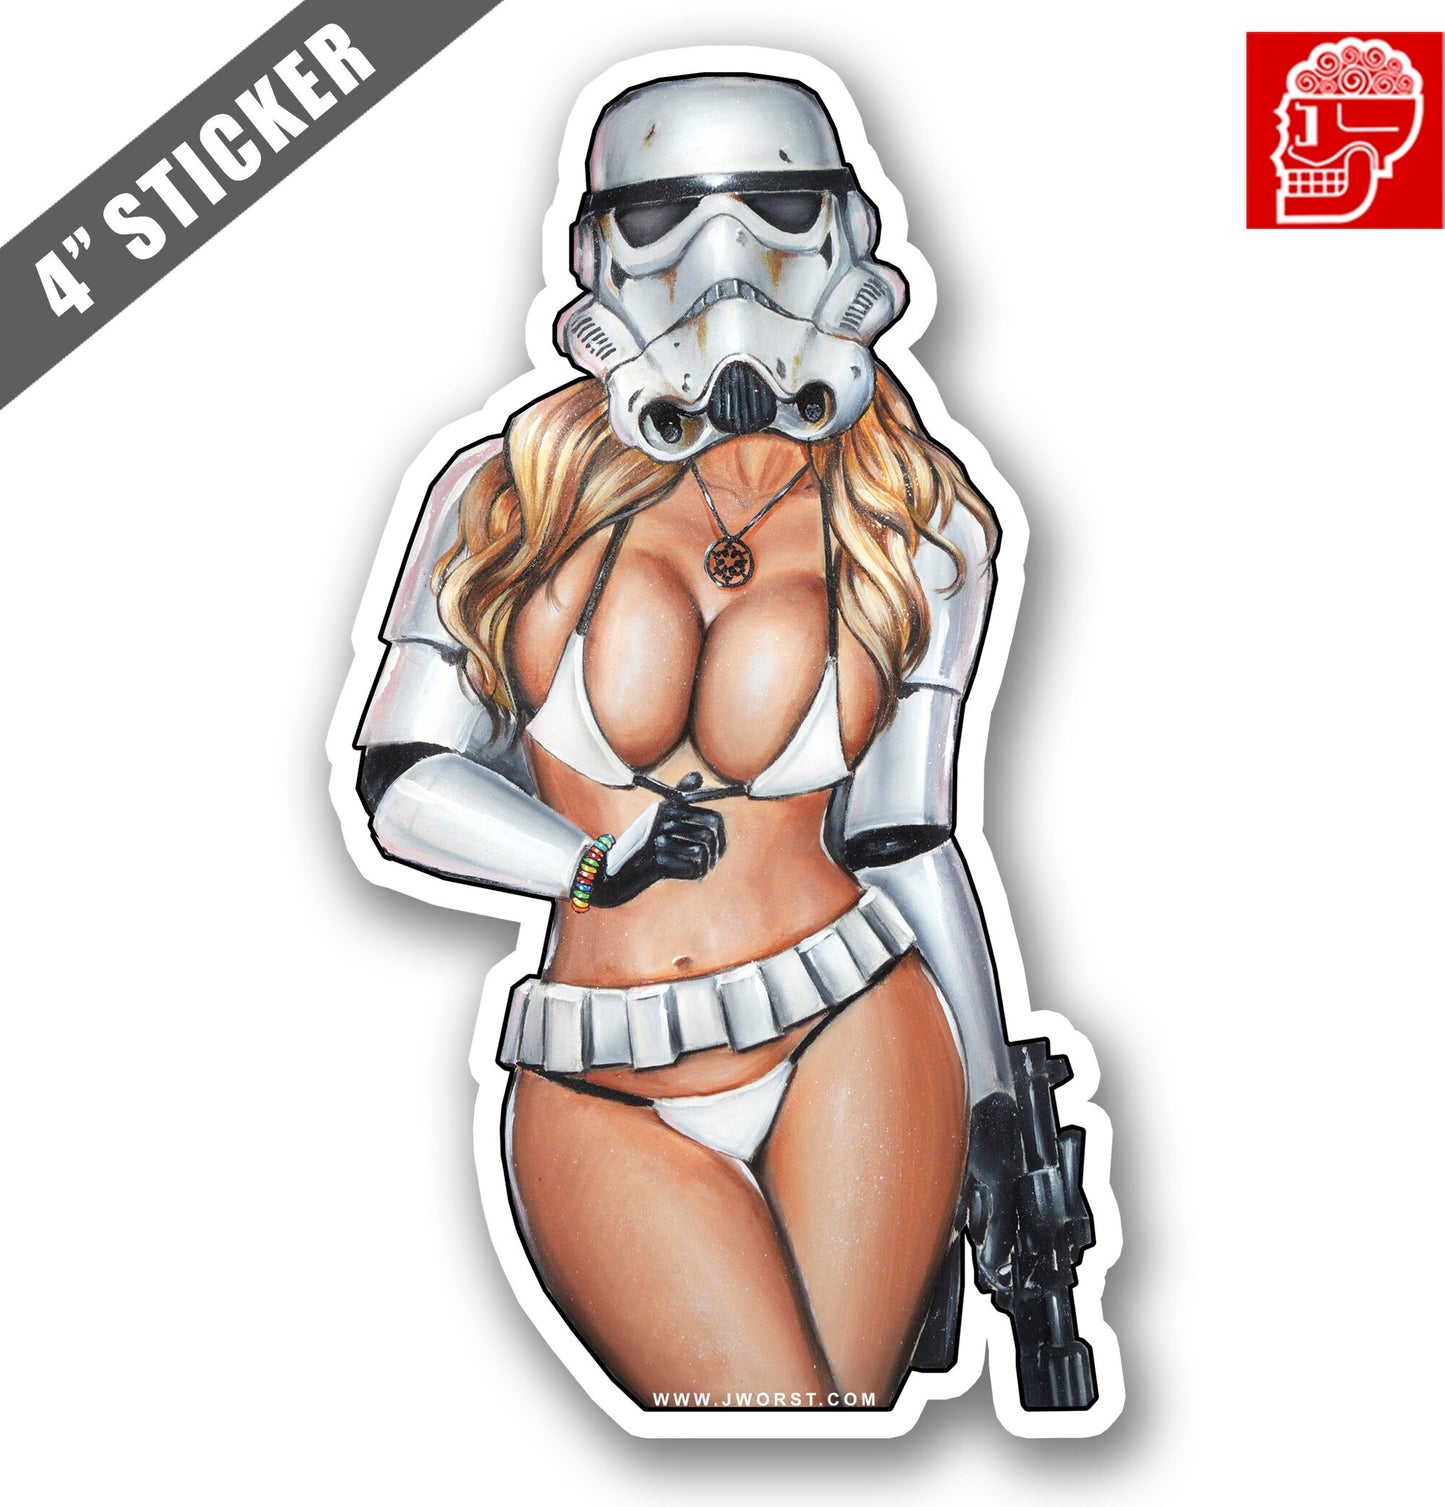 Sexy Storm Trooper Cosplay Concept